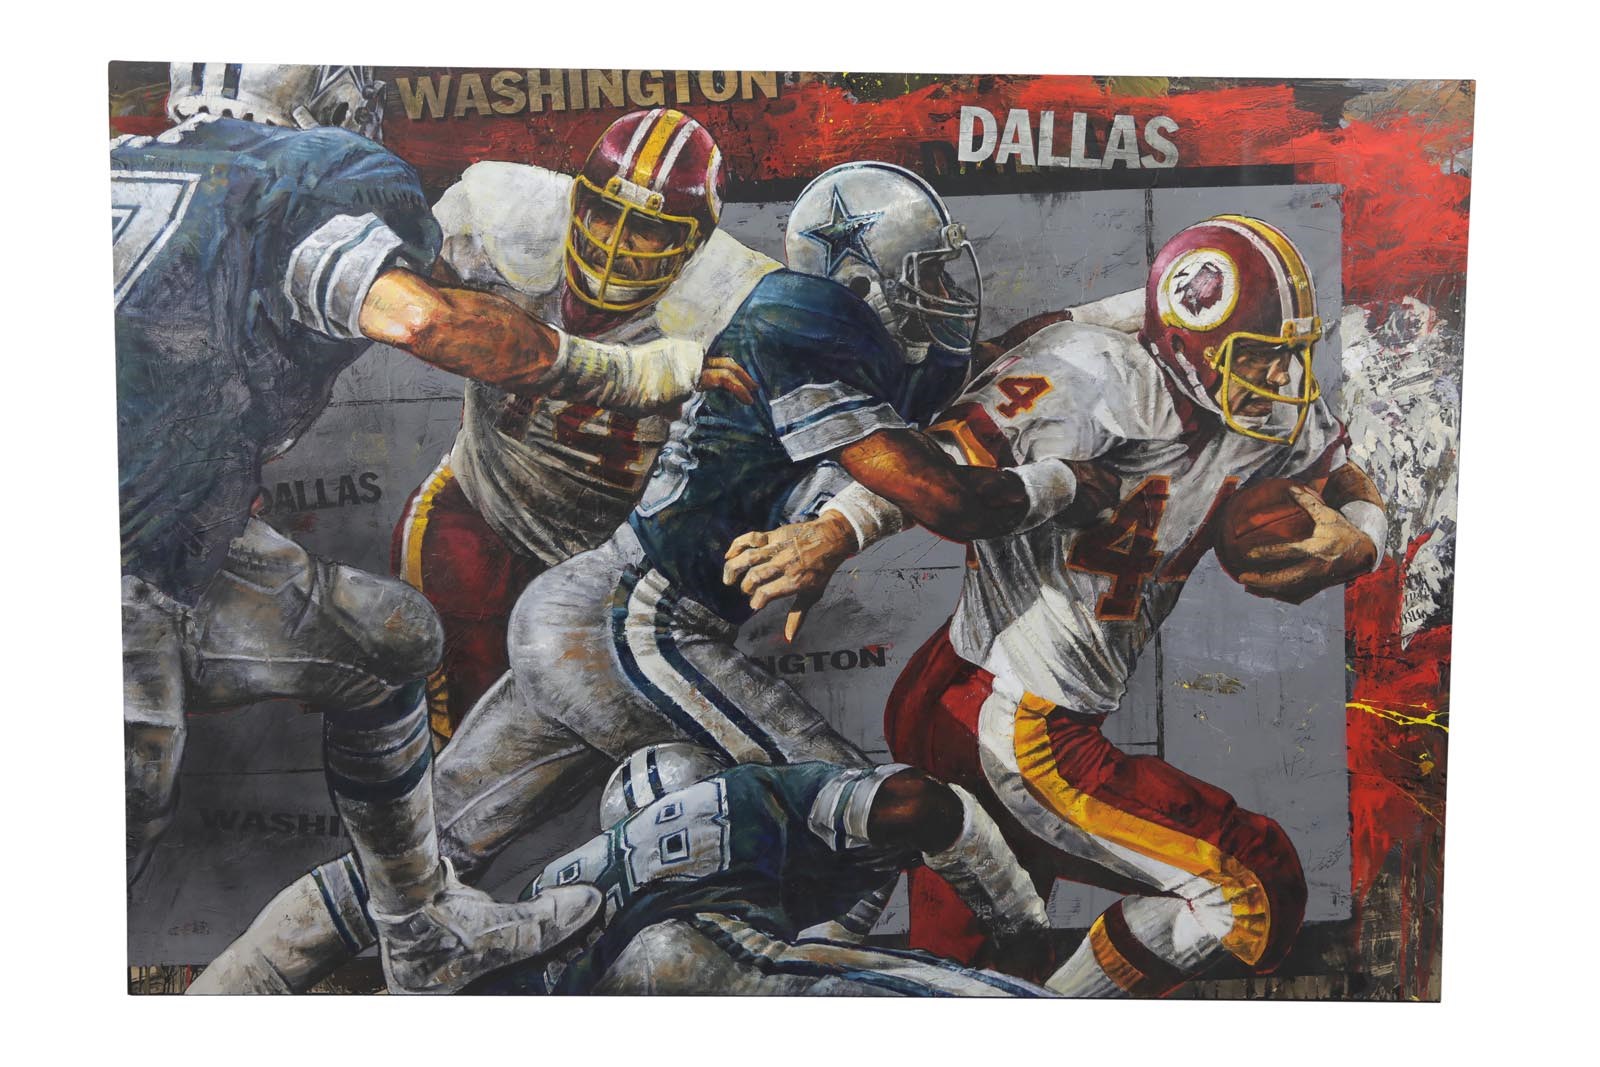 Football - John Riggins "The Rivalry" Oil on Board by Stephen Holland